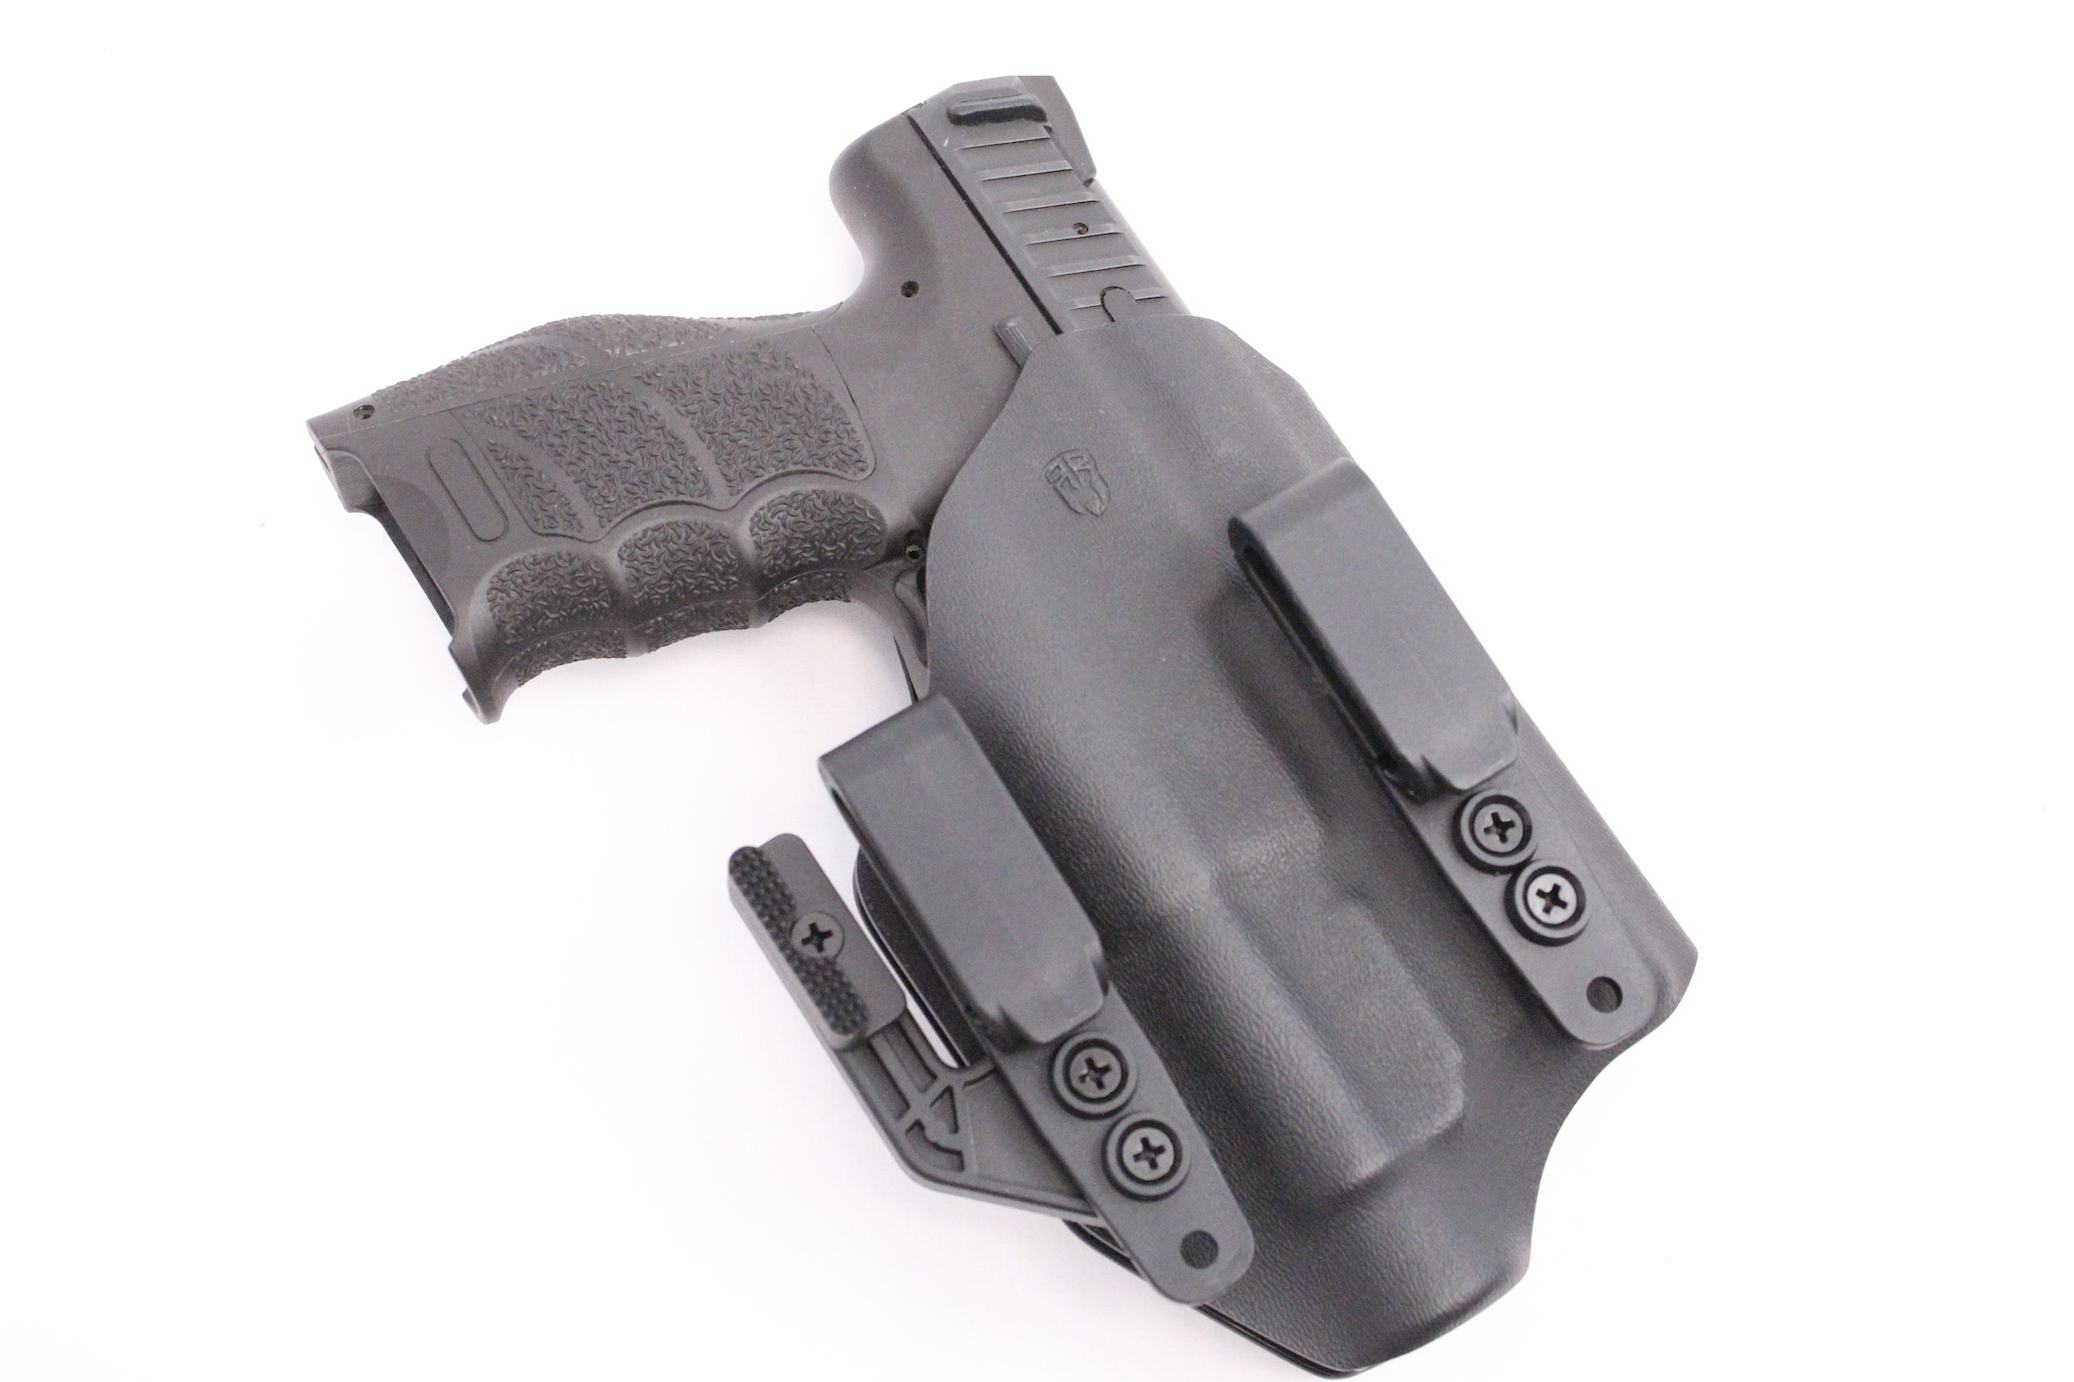 Concealment Custom Kydex Inside The Waist Band Glock 17 With SureFire XC1.